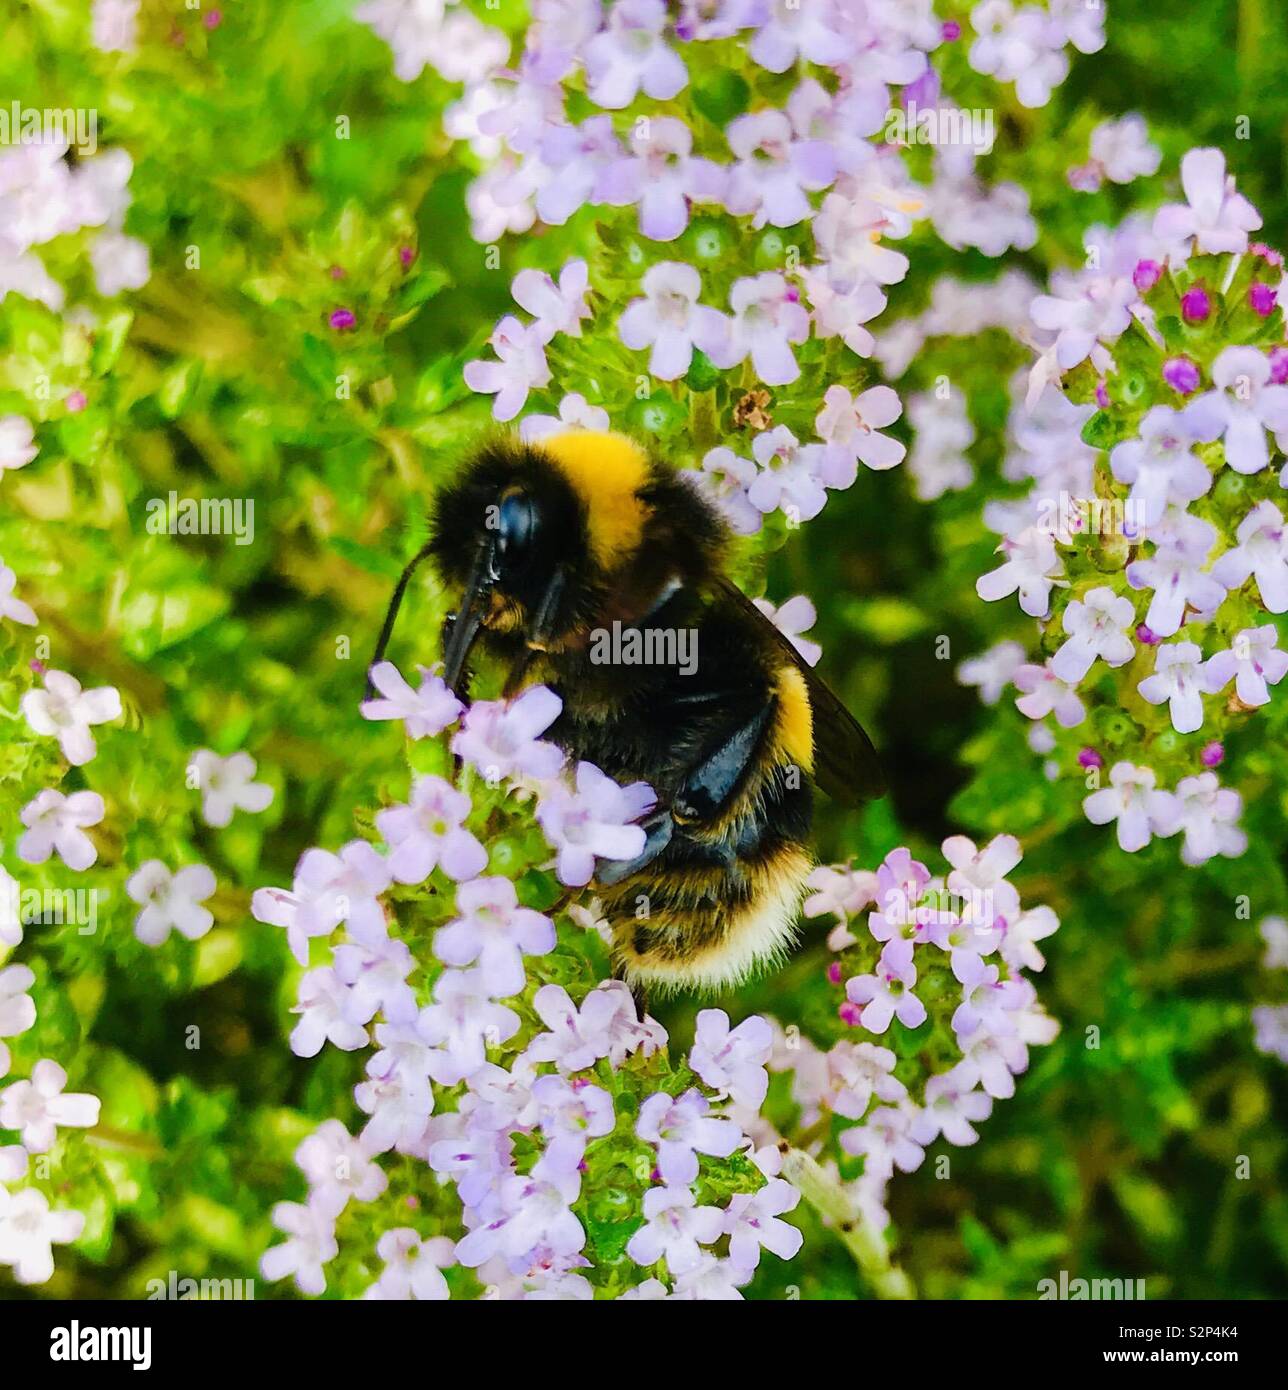 Bumblebee on thyme herb in an English garden Stock Photo